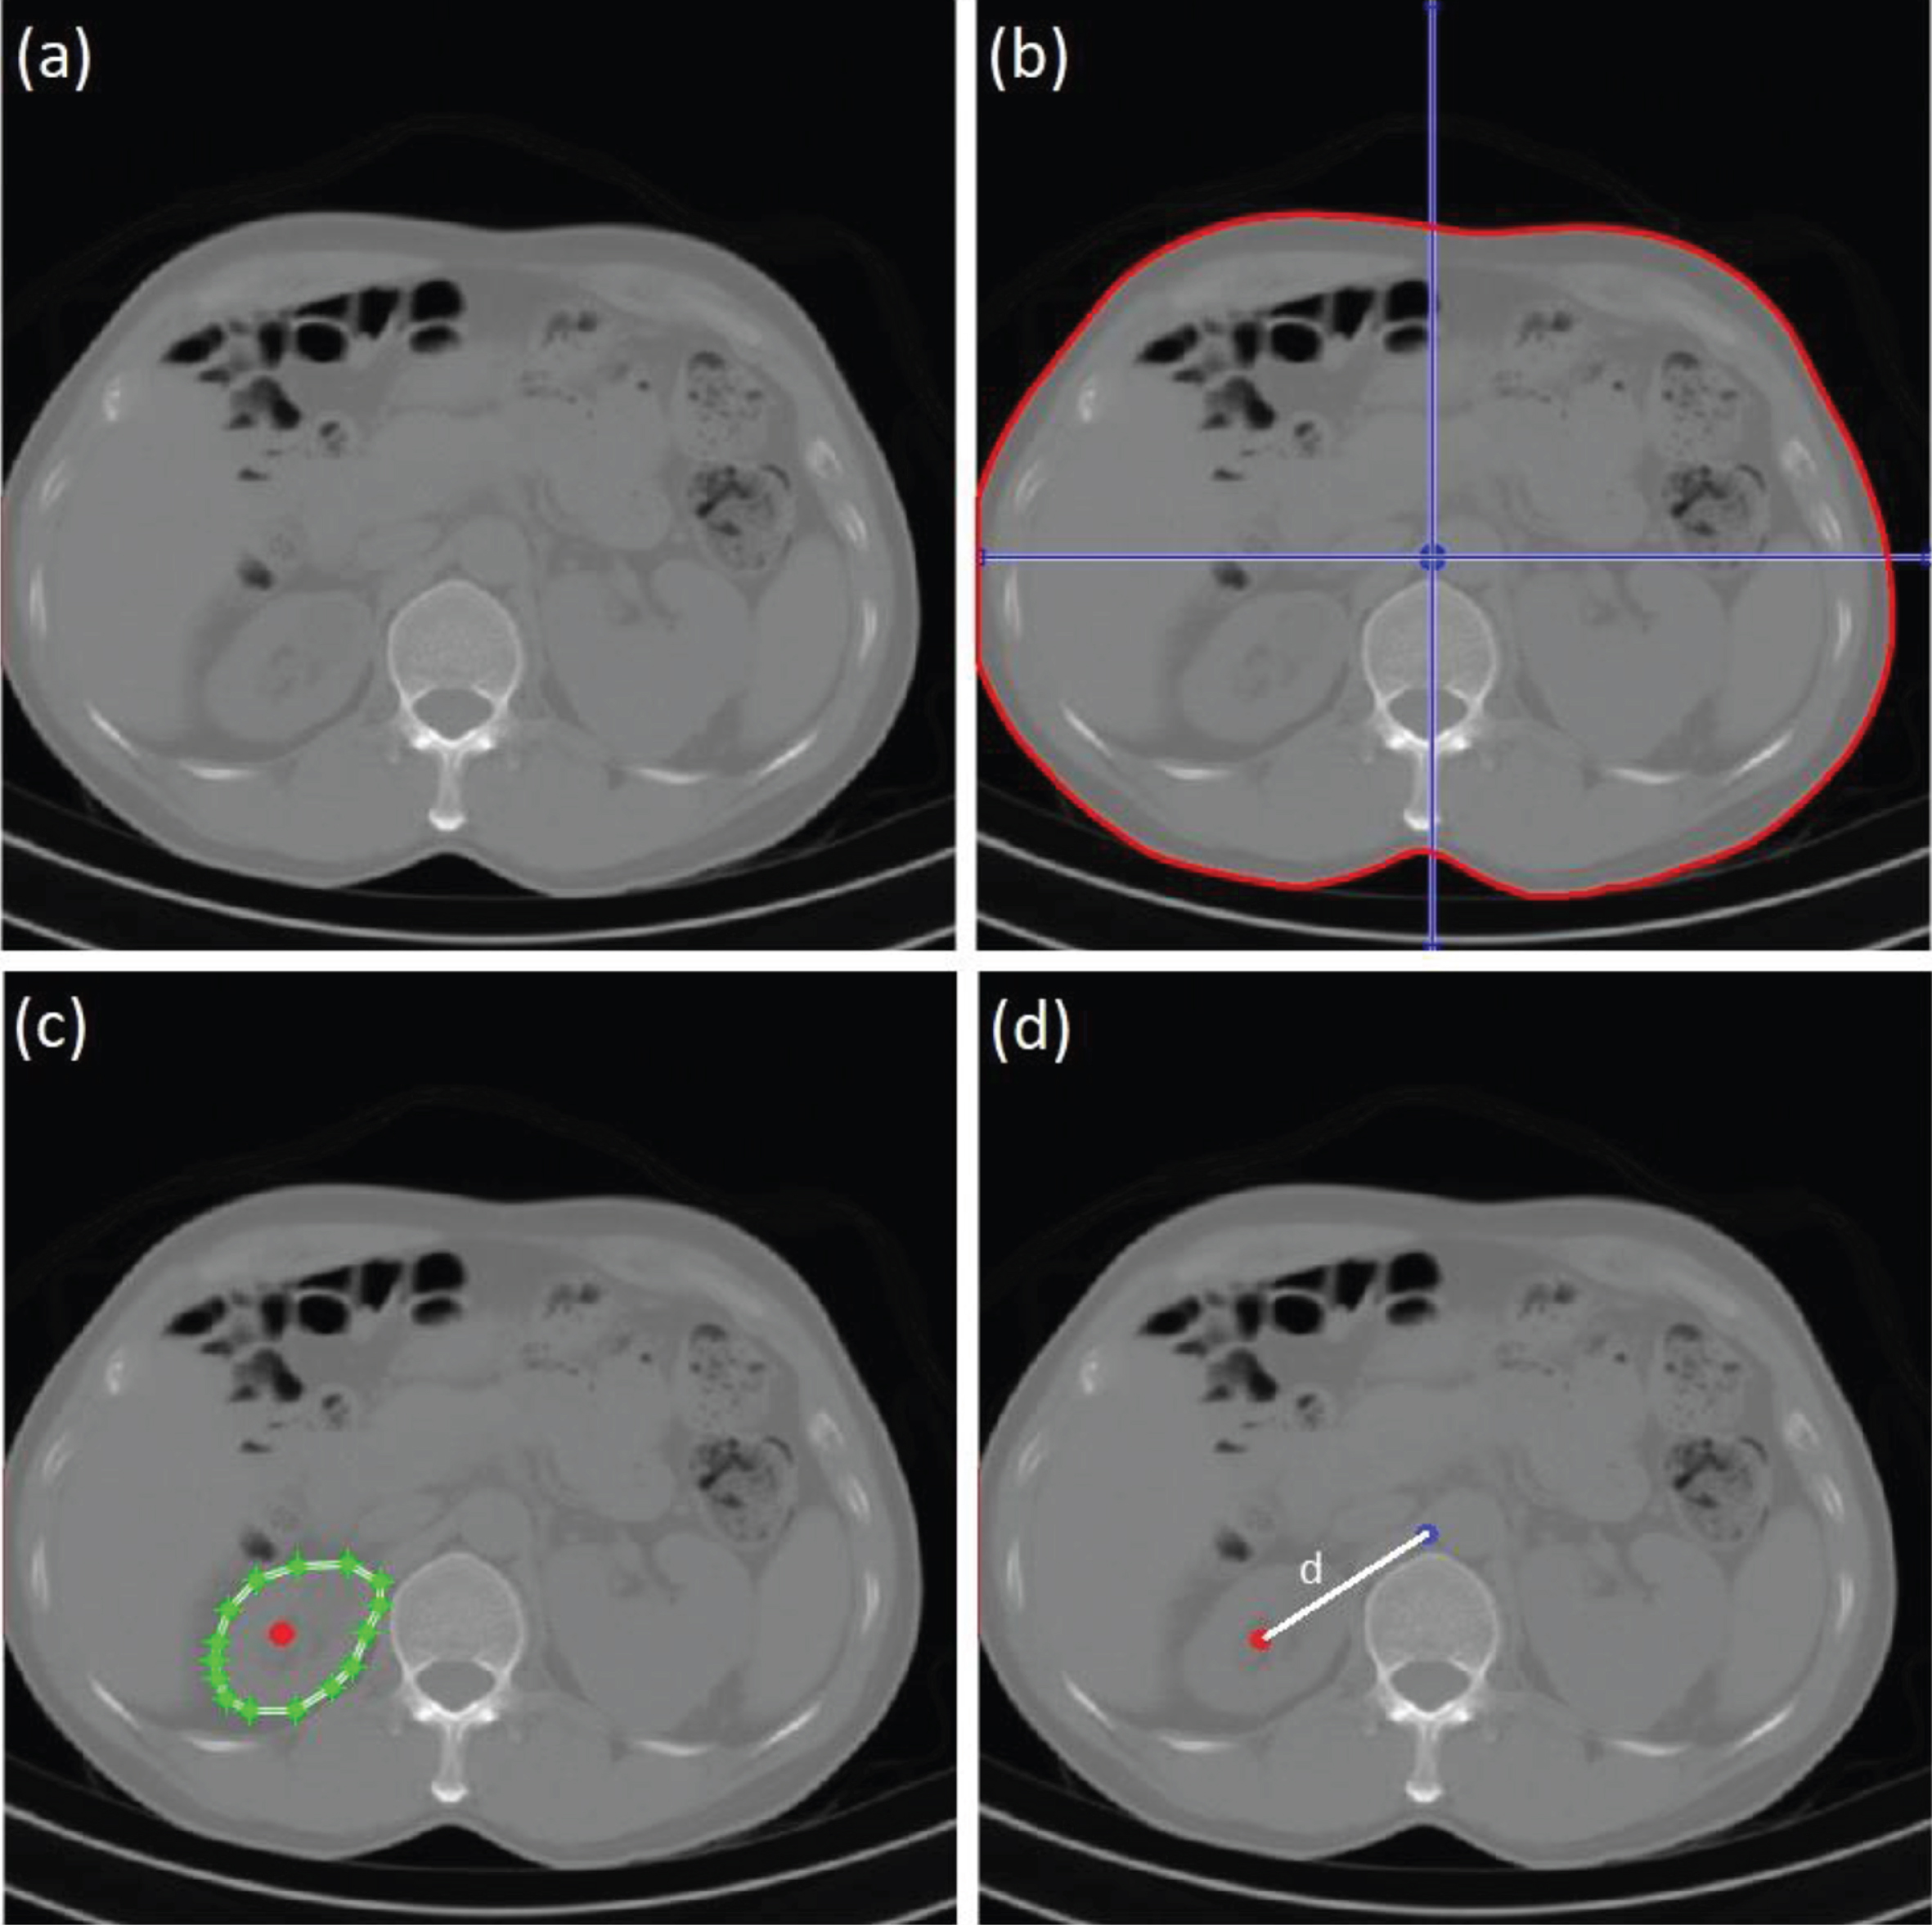 Example images of organ (left kidney) dose estimation. (a) image of abdomen, (b) water-equivalent diameter and patient centre determination, (c) volume and organ centre determination, and (d) distance between centre of patient and centre of organ computation.